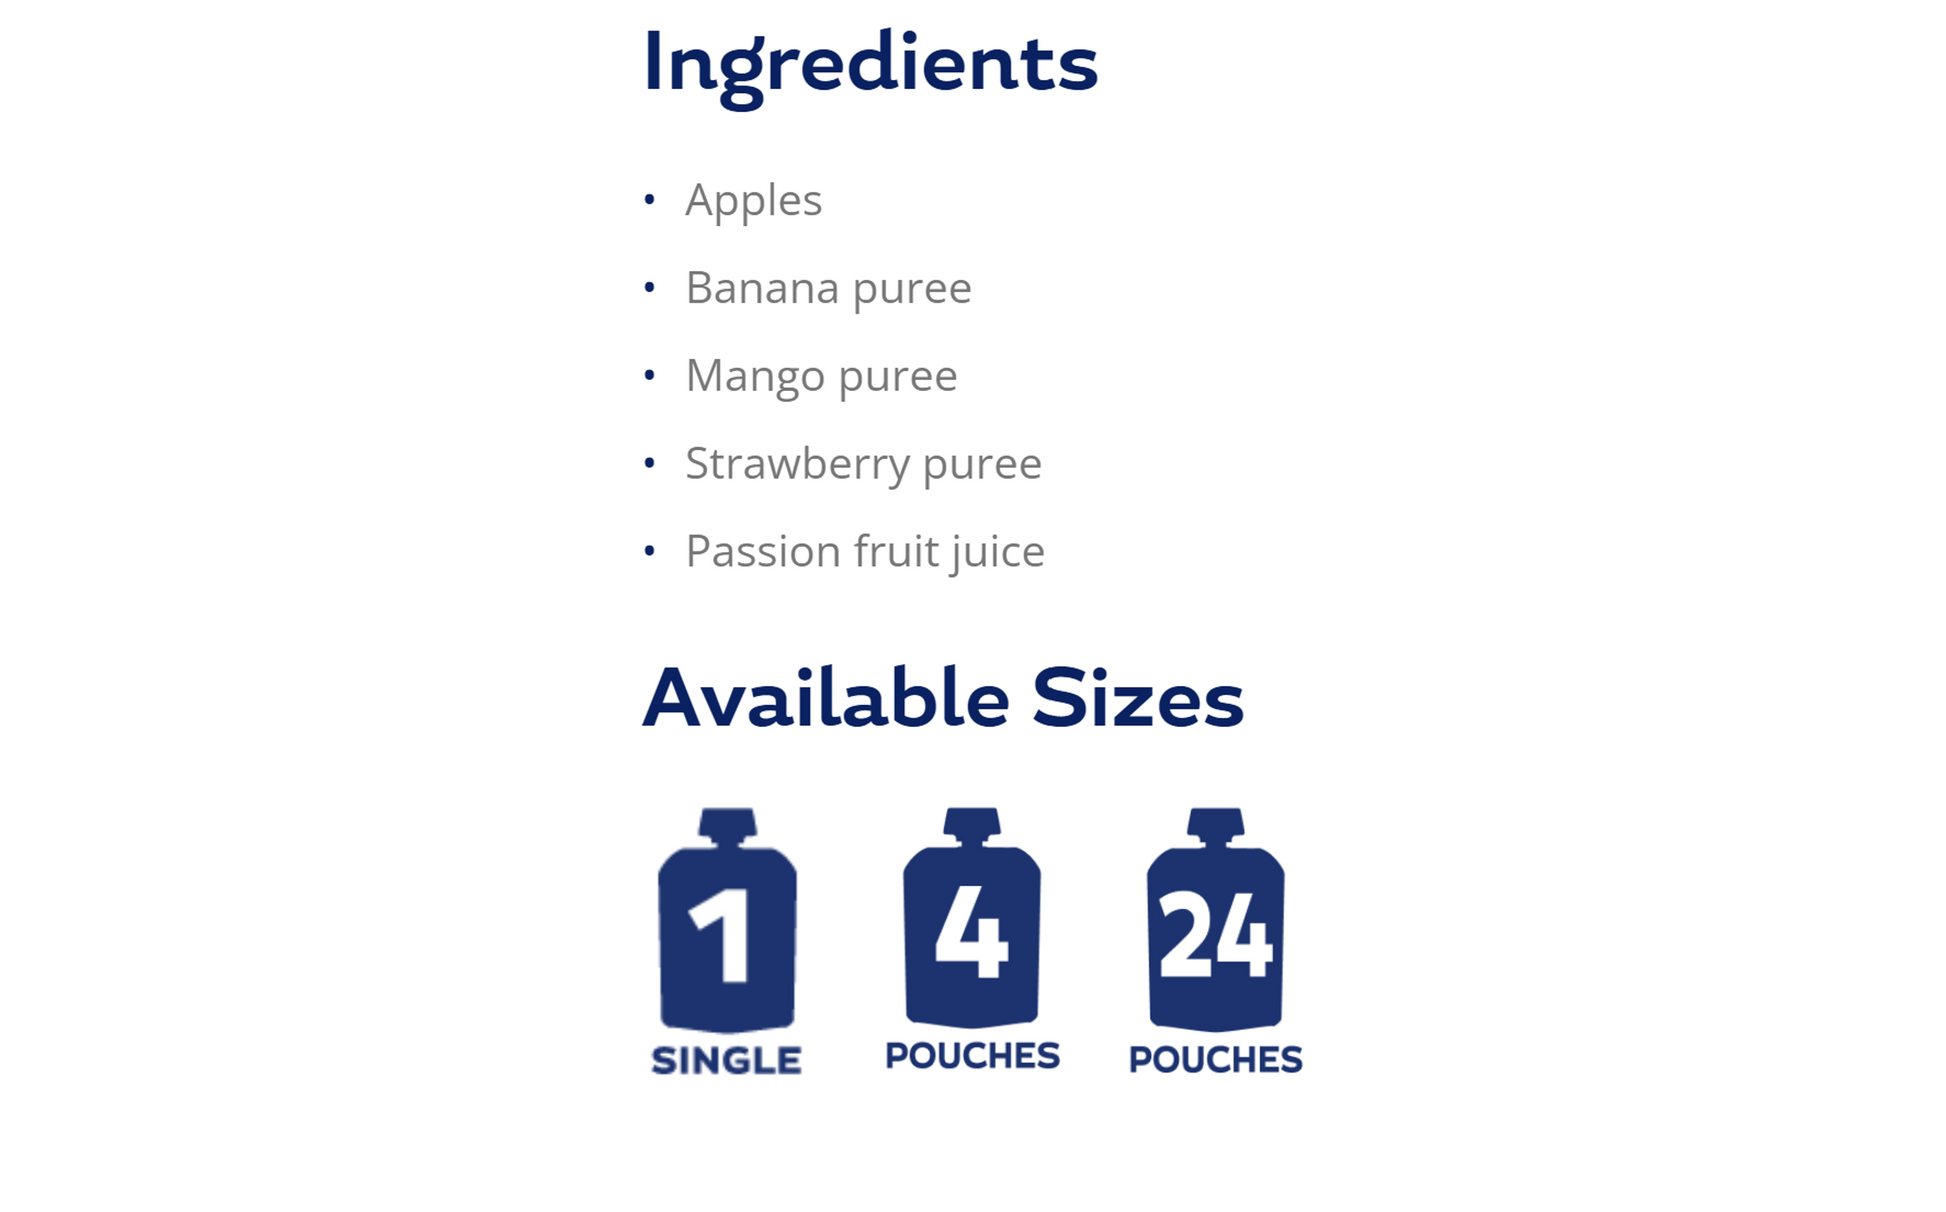 Simple ingredients and available sizes of Buddy Fruits Multifruit & Apple fruit pouch.